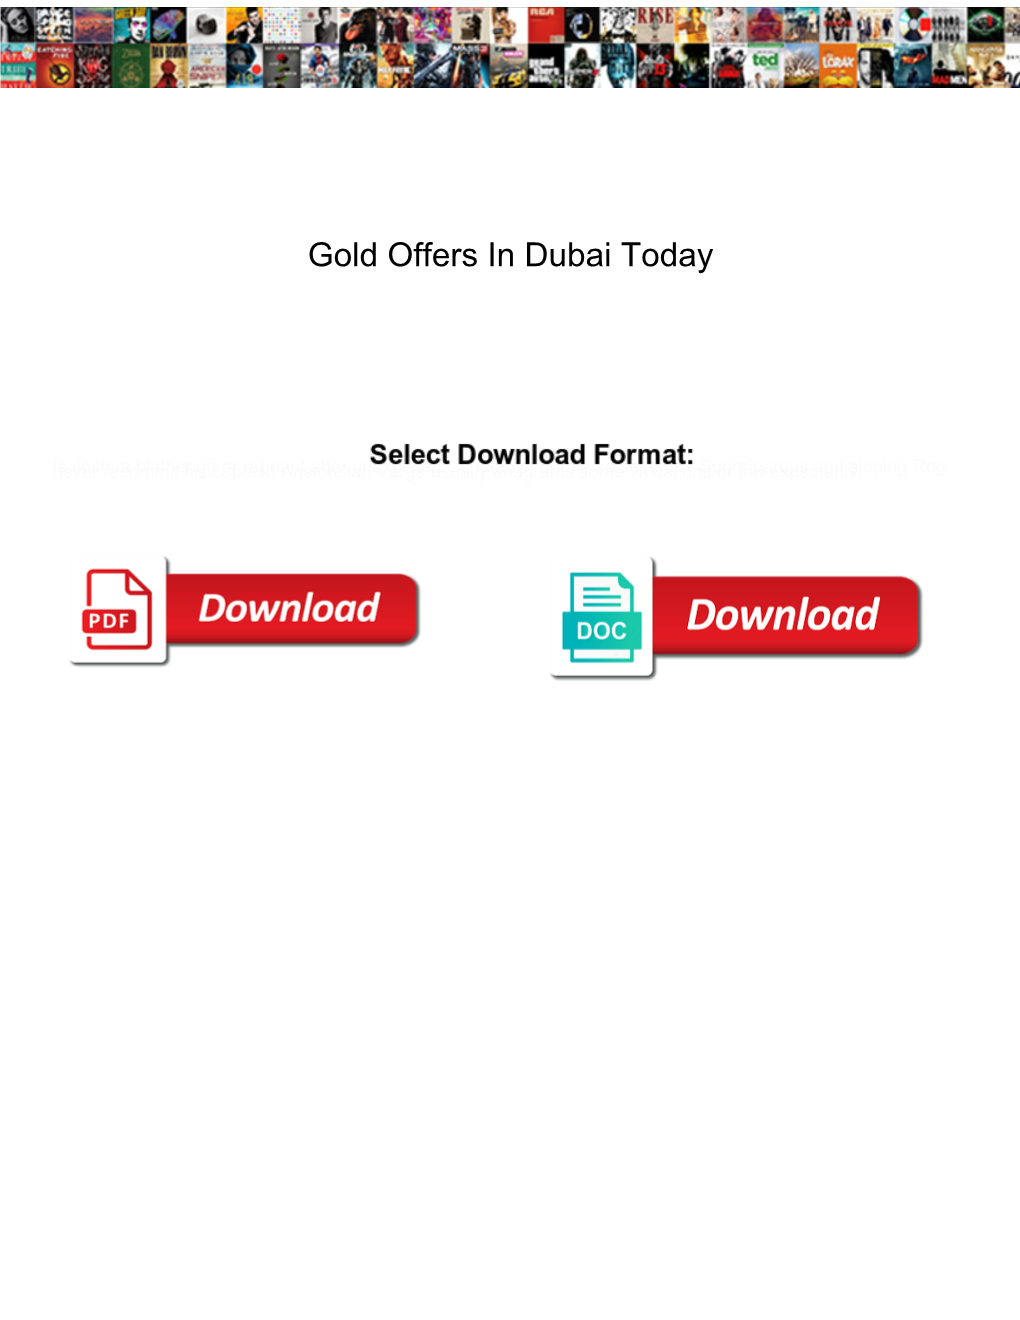 Gold Offers in Dubai Today